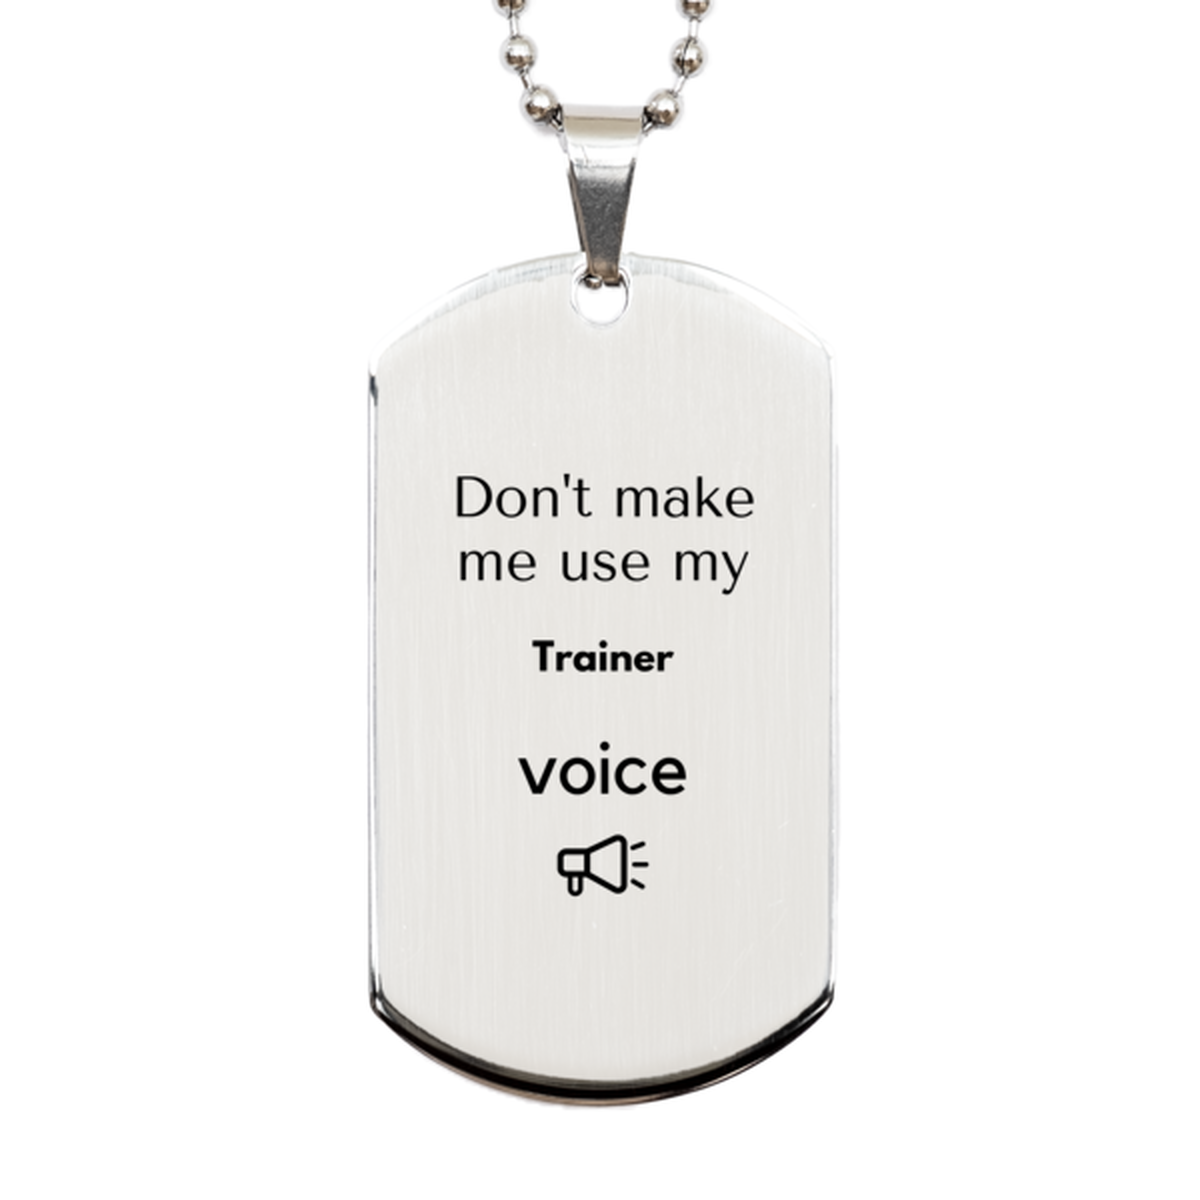 Don't make me use my Trainer voice, Sarcasm Trainer Gifts, Christmas Trainer Silver Dog Tag Birthday Unique Gifts For Trainer Coworkers, Men, Women, Colleague, Friends